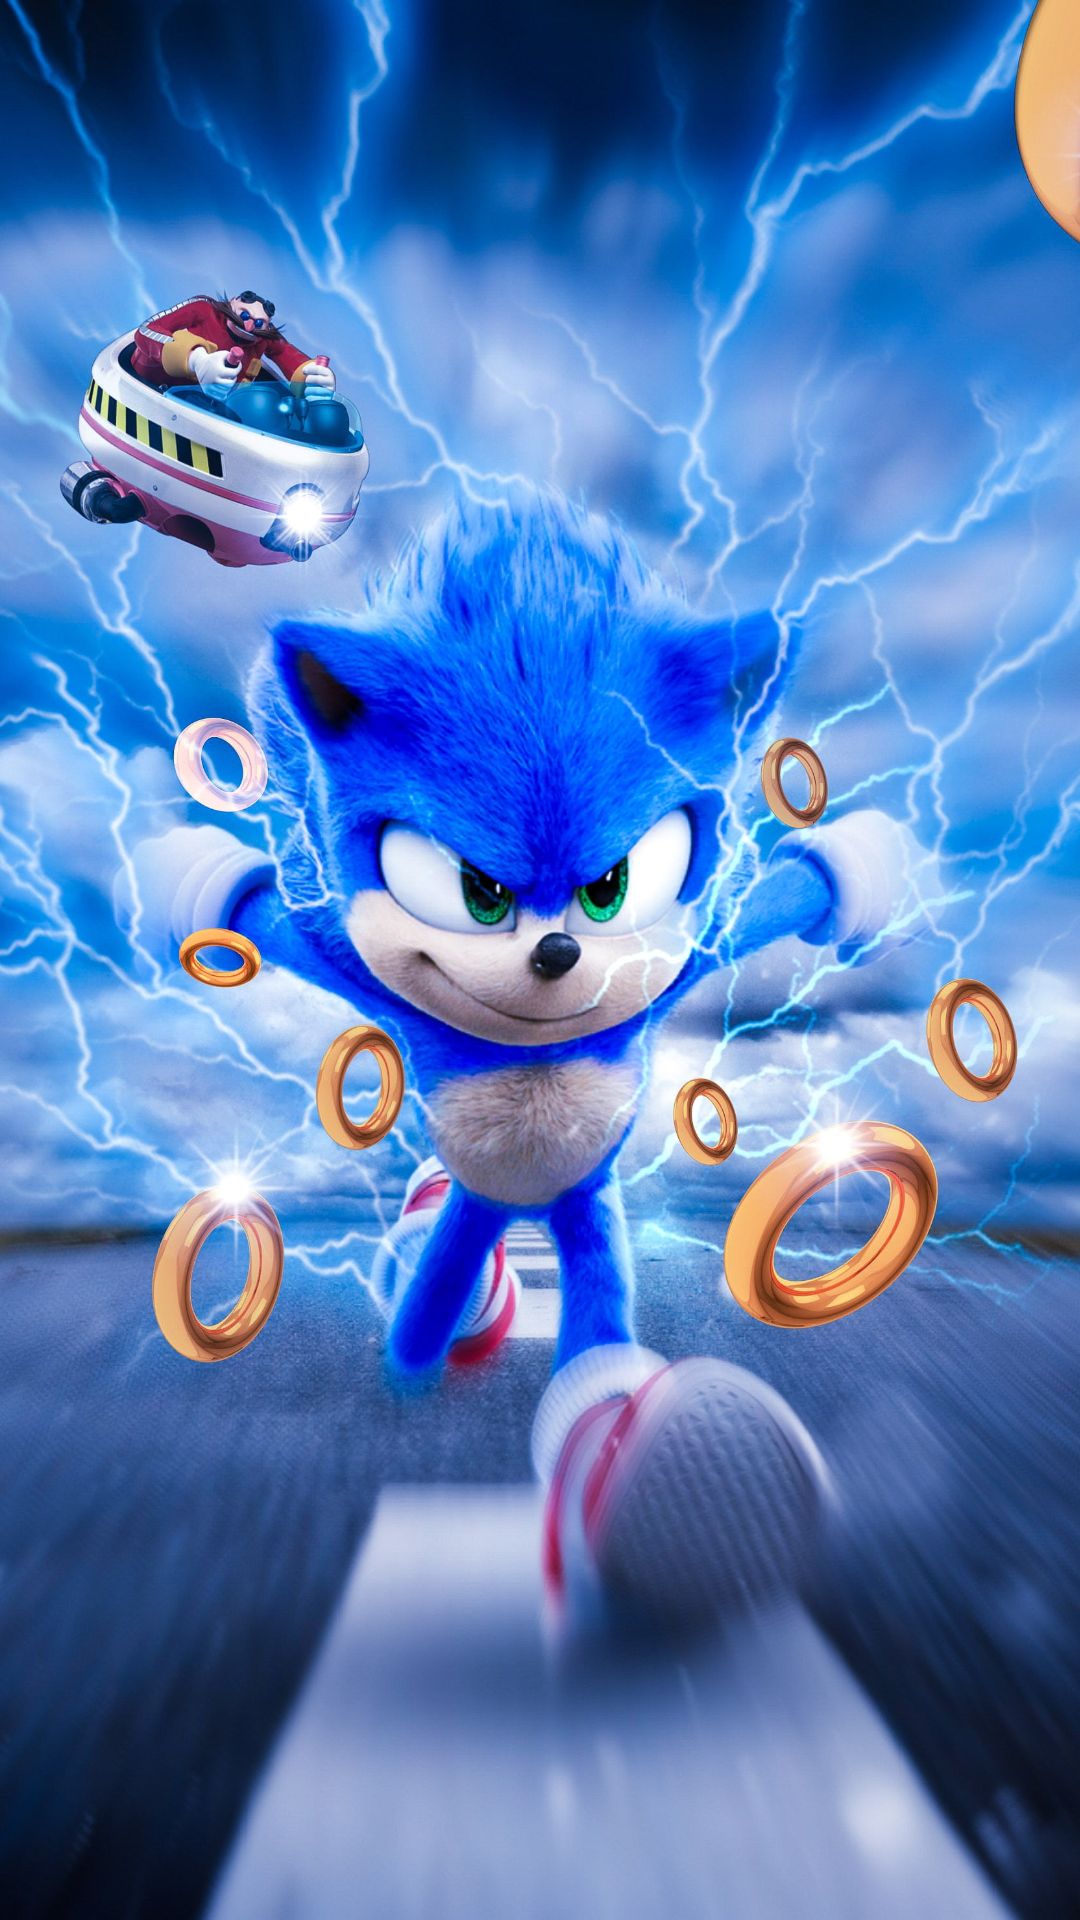 Sonic Art Wallpapers  Sonic Aesthetic Wallpaper iPhone  Android